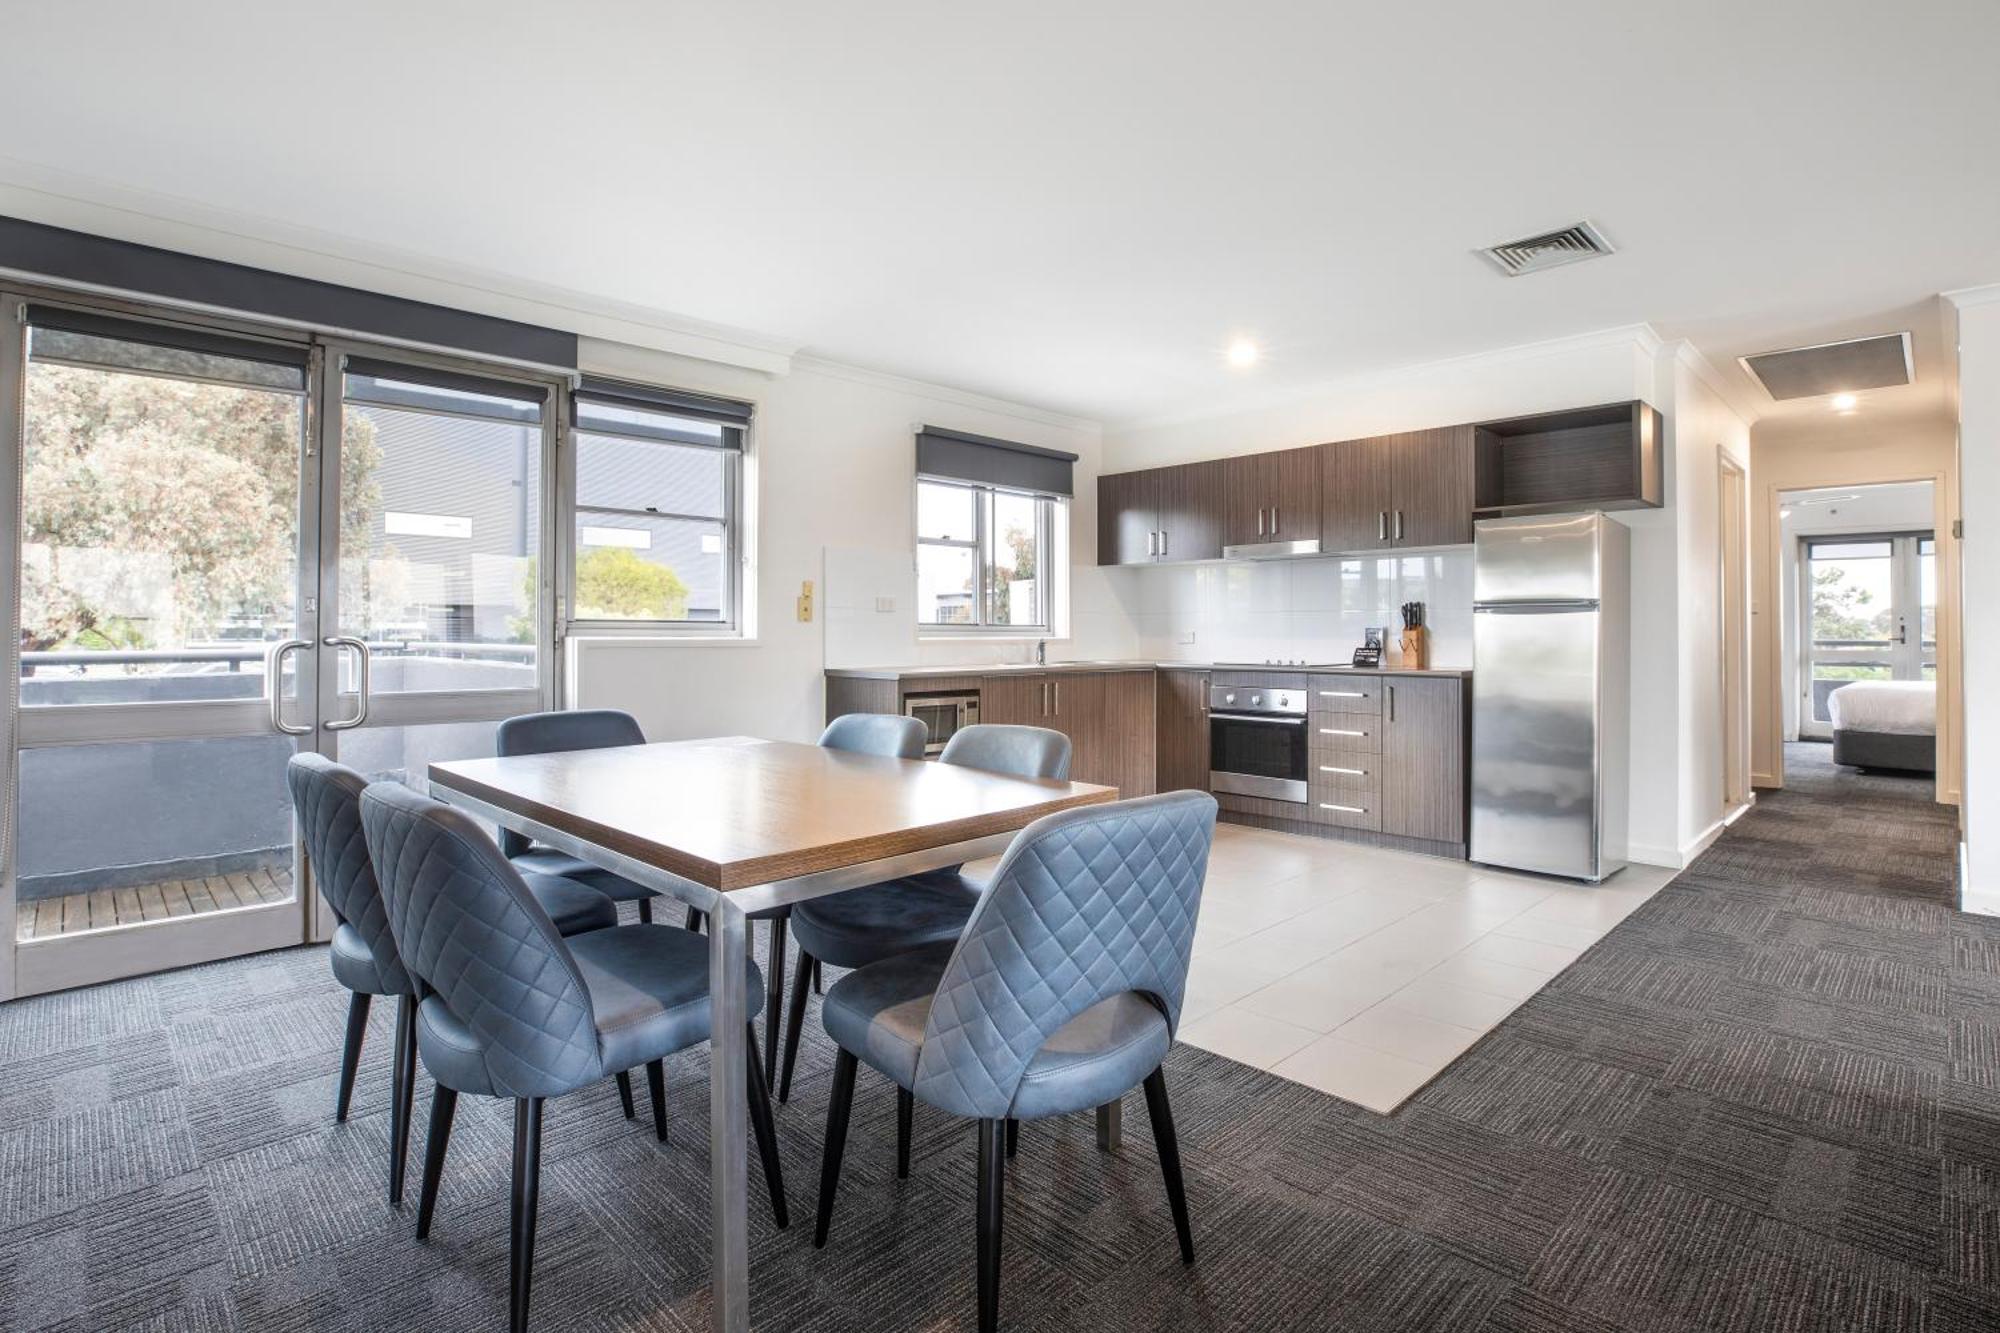 Doncaster Apartments By Nightcap Plus Экстерьер фото